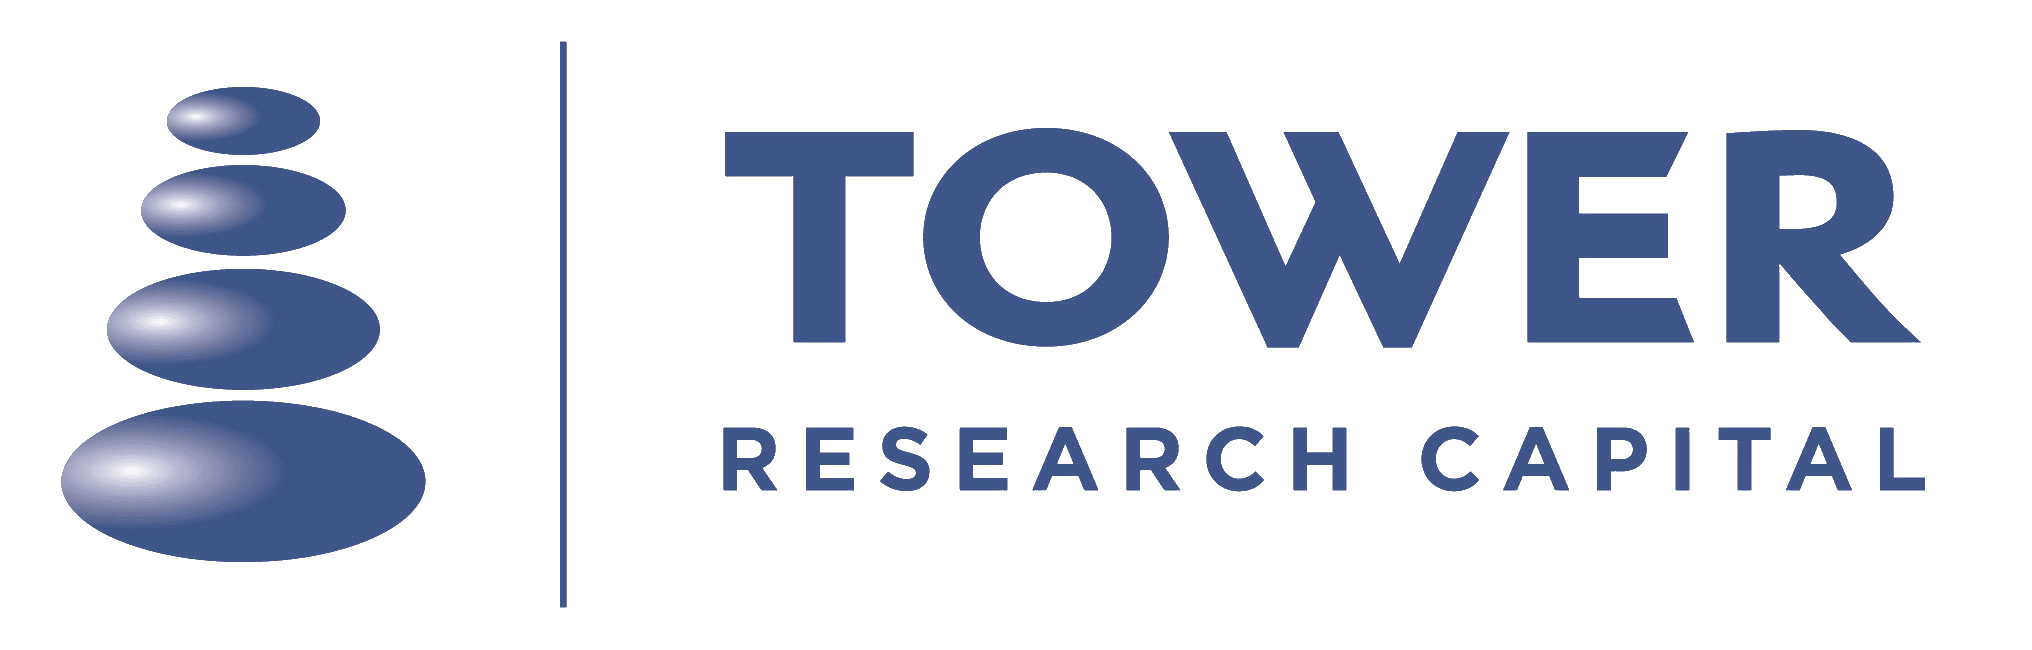 Tower research capital logo.